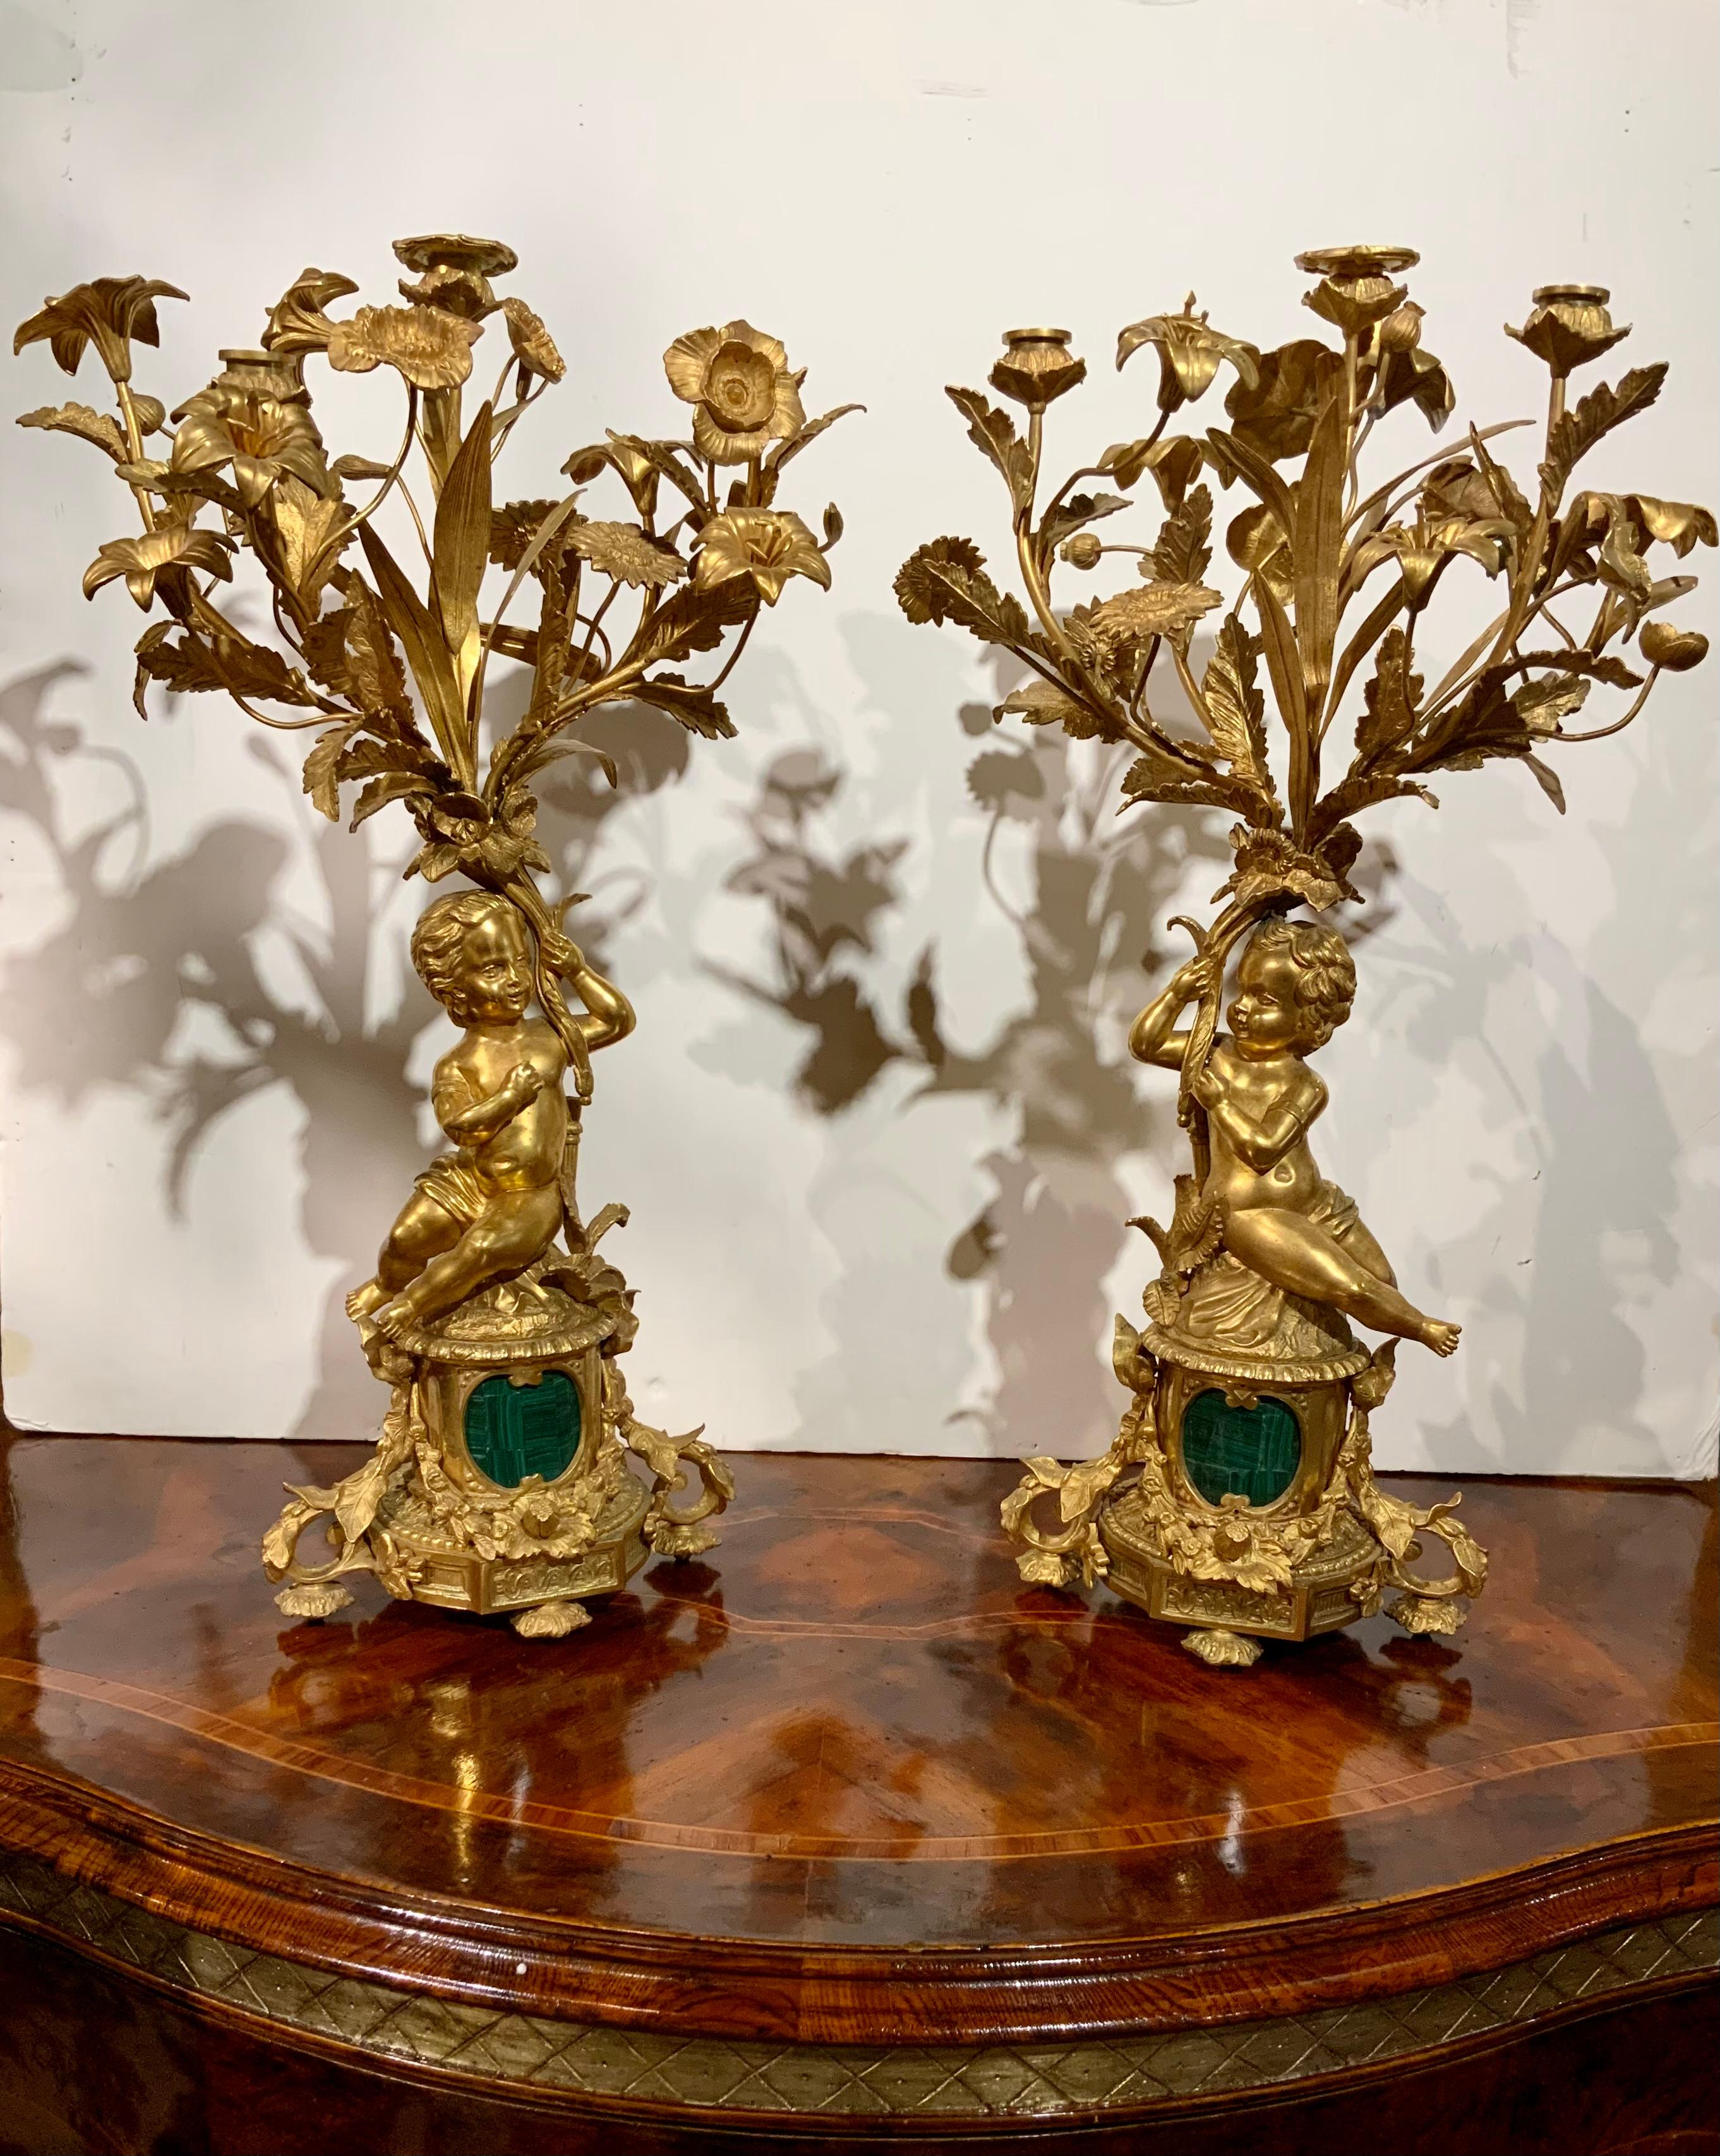 This pair of gilt bronze candleabrum are in fine condition with
The original bright gold patina. Each candleabrum has a gilt
Putti holding three branches holding three candleholders.
Each candleabrum has a multitude of winding branches and
Ending in